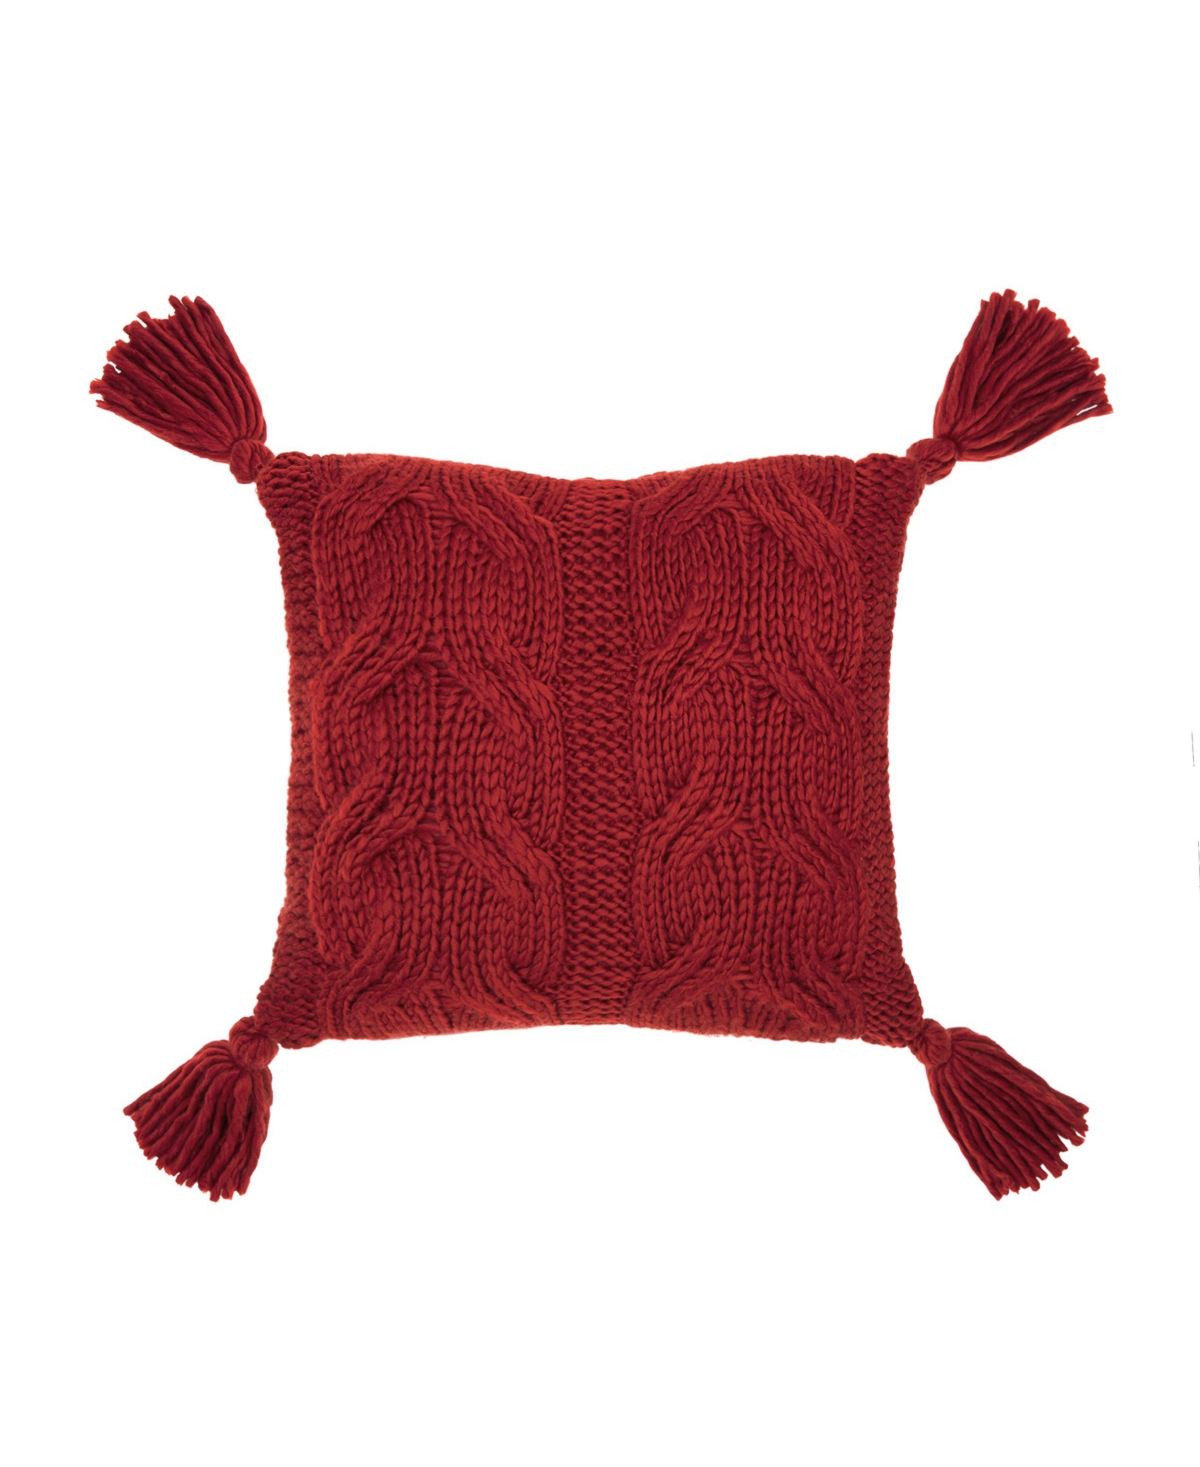 Patricia Nash Knit Tasseled Decorative Pillow, 20" X 20" In Red